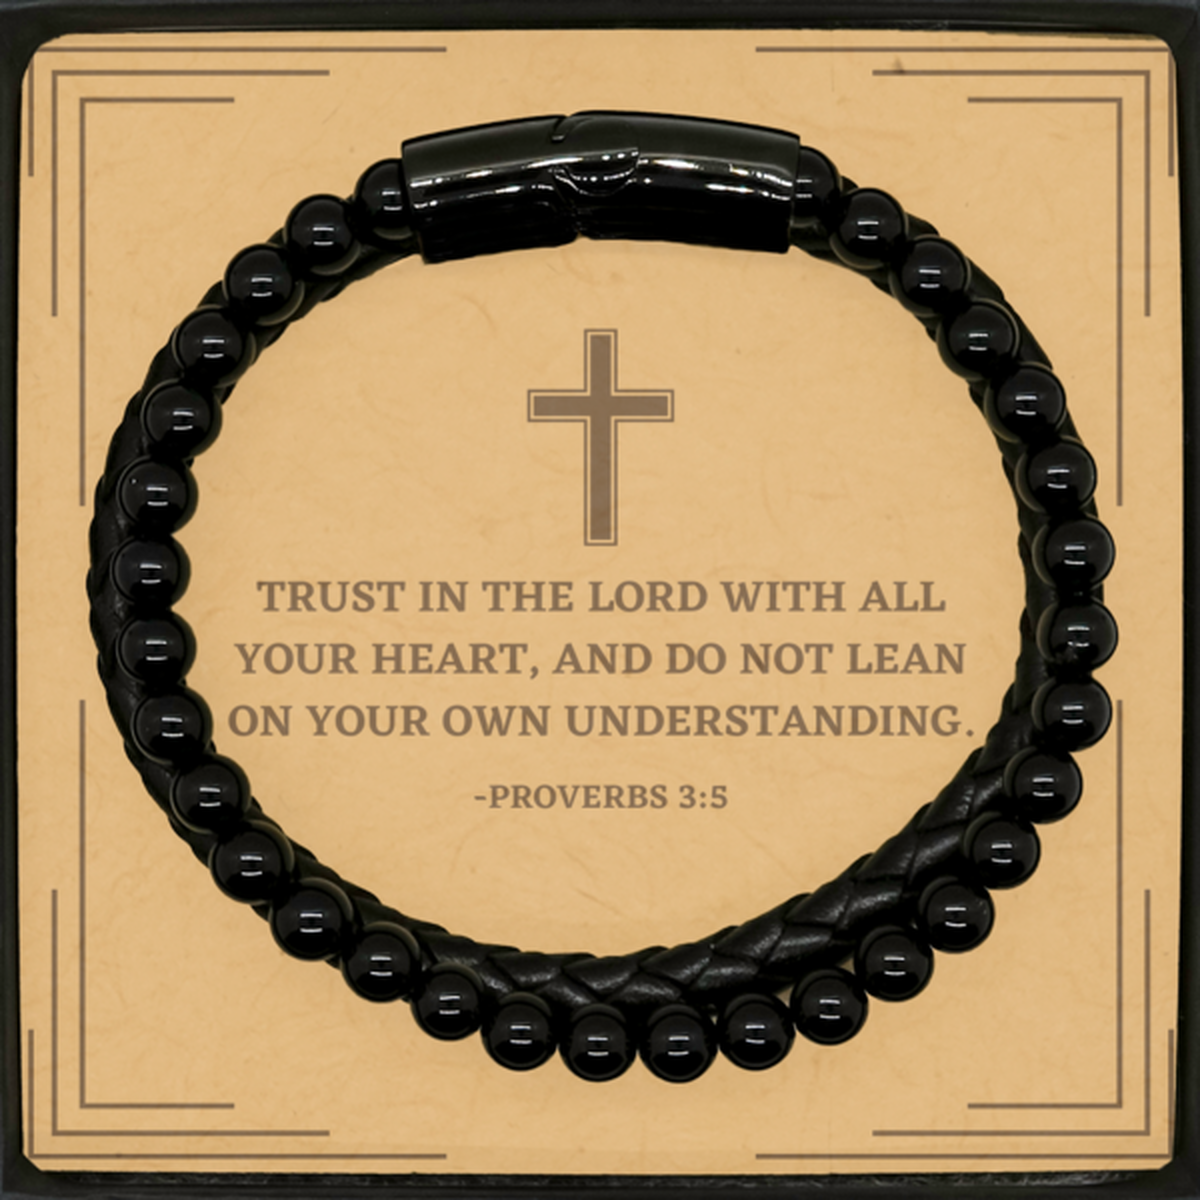 Baptism Gifts For Teenage Boys Girls, Christian Bible Verse Stone Leather Bracelet, Trust in the Lord with all your heart, Confirmation Gifts, Bible Verse Card for Son, Godson, Grandson